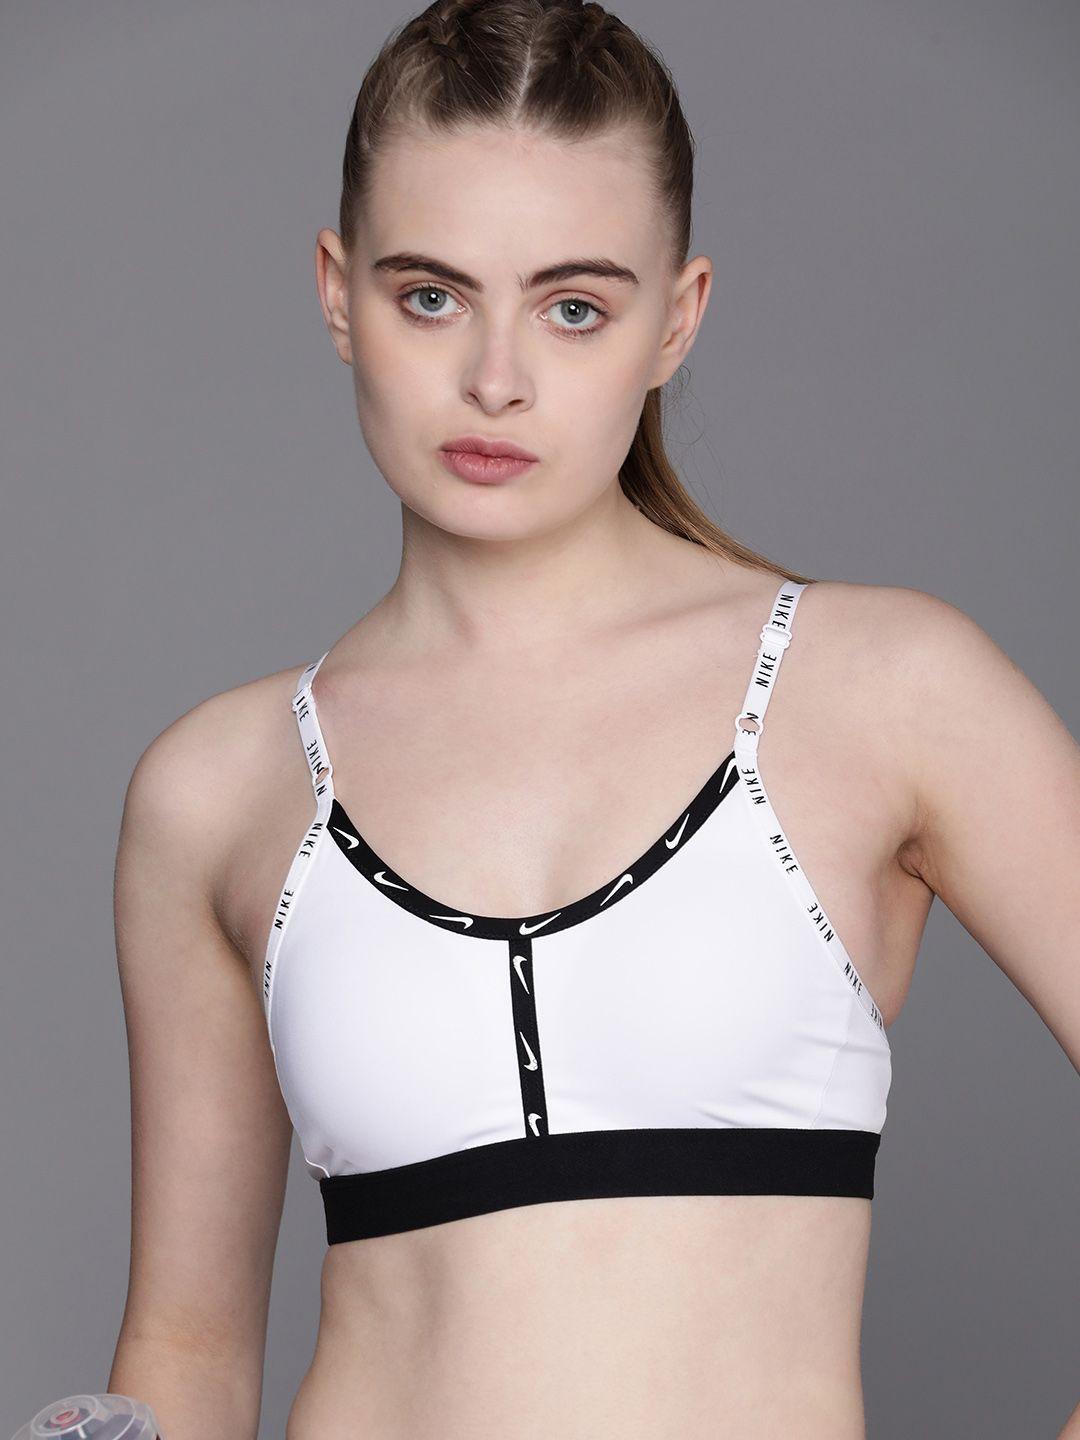 nike-brand-logo-printed-lightly-padded-sports-bra-with-dry-fit--technology-dr5686-100